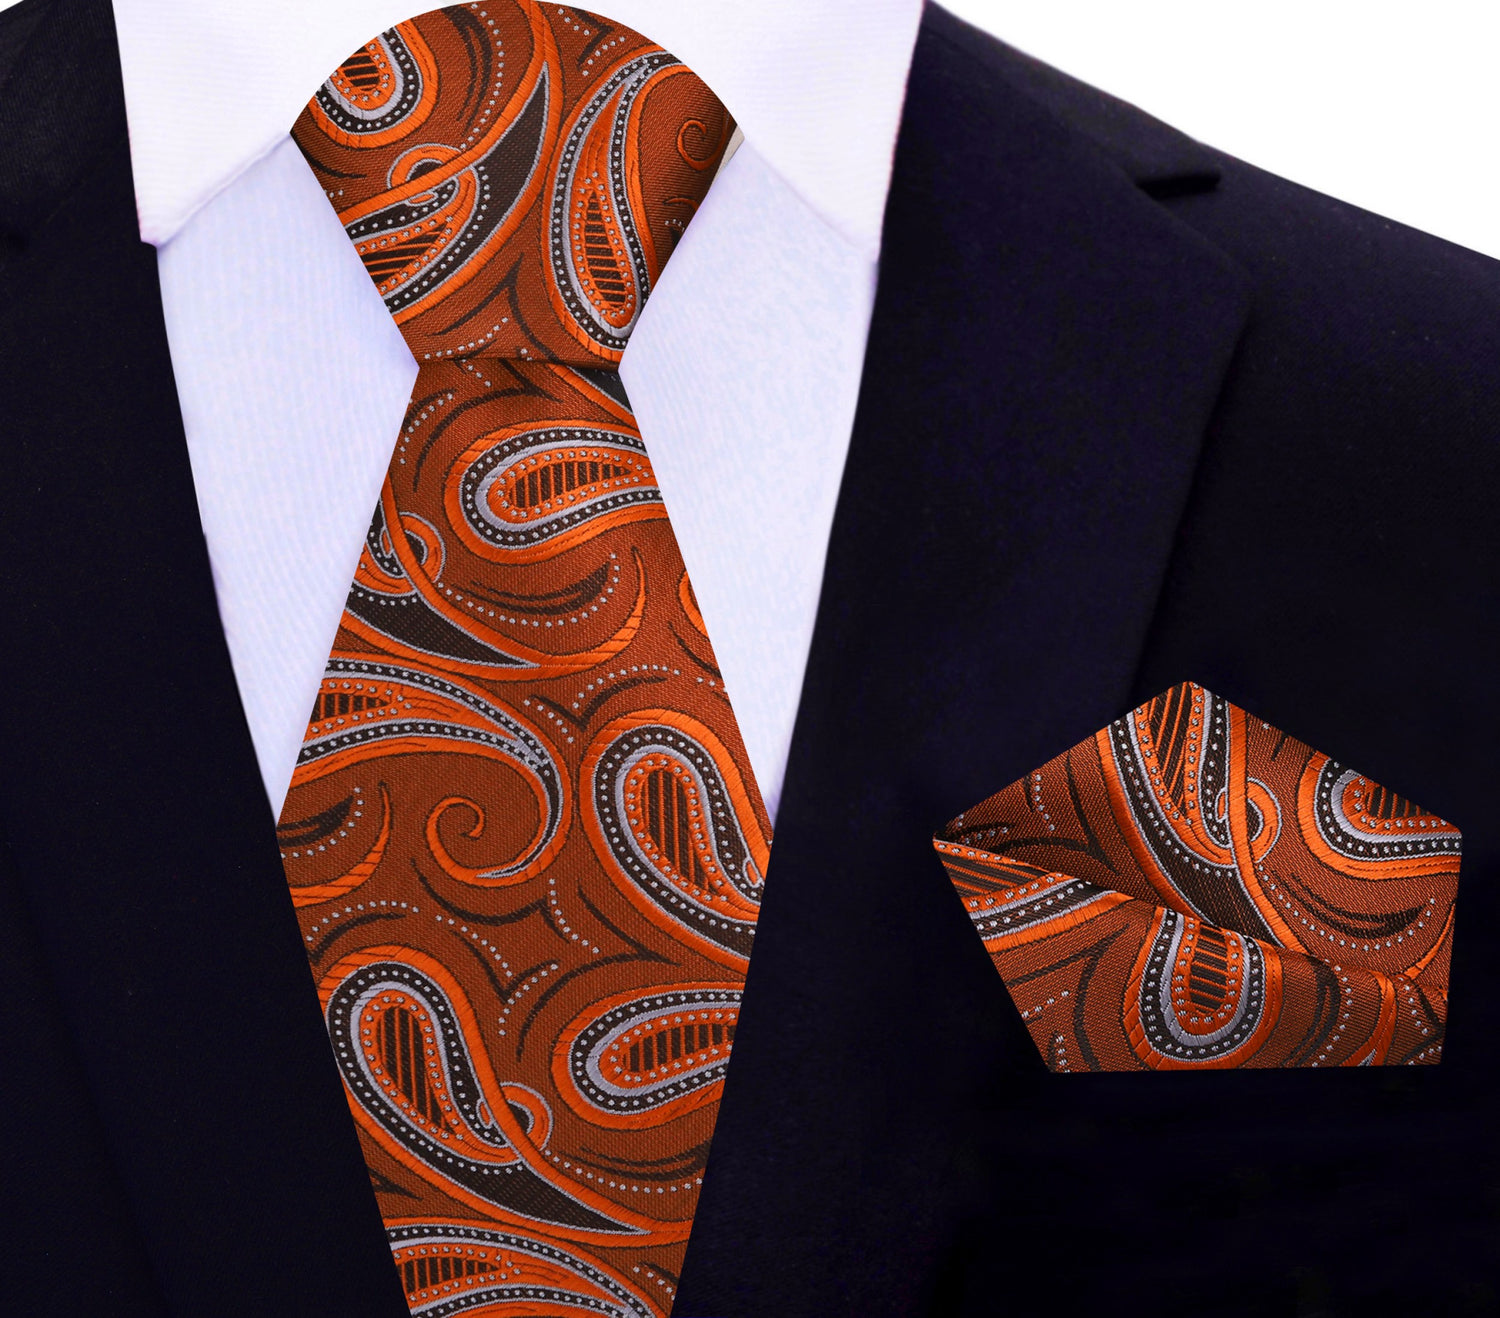 Alt View: Orange and Brown Paisley Necktie and Matching Square